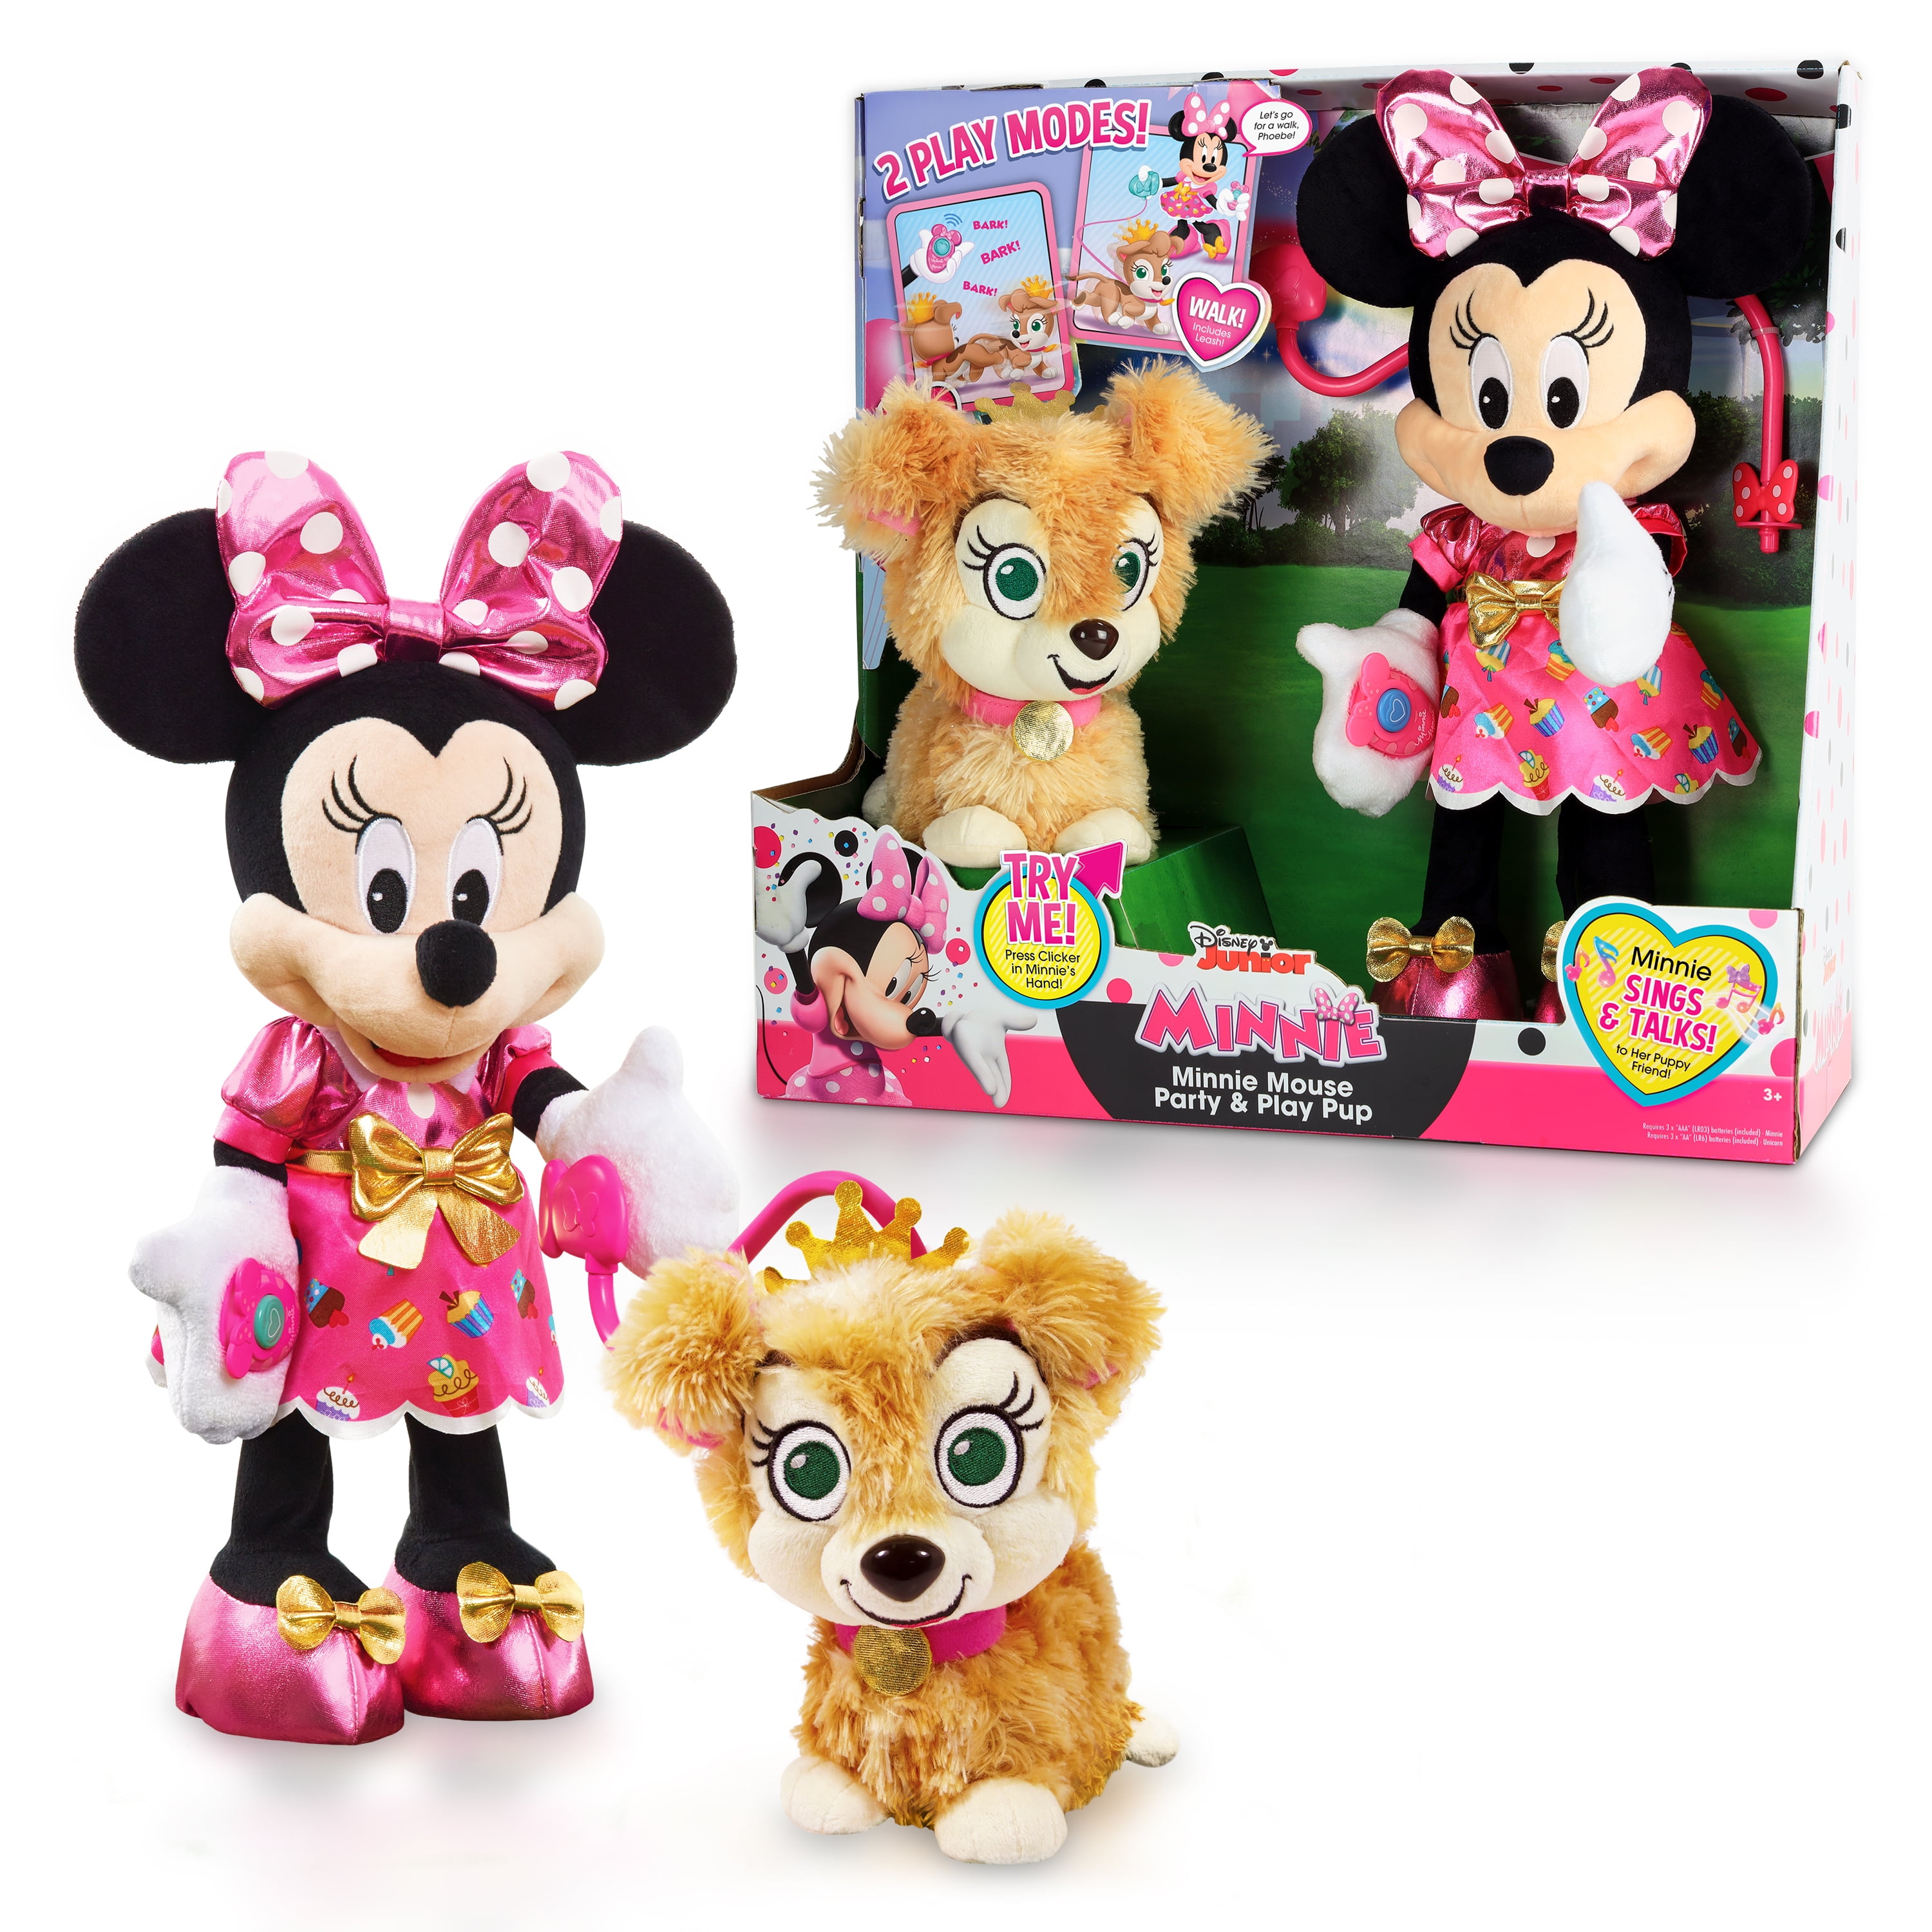 Disney Junior Minnie Mouse Party & Play Pup Feature Plush, Ages 3 +